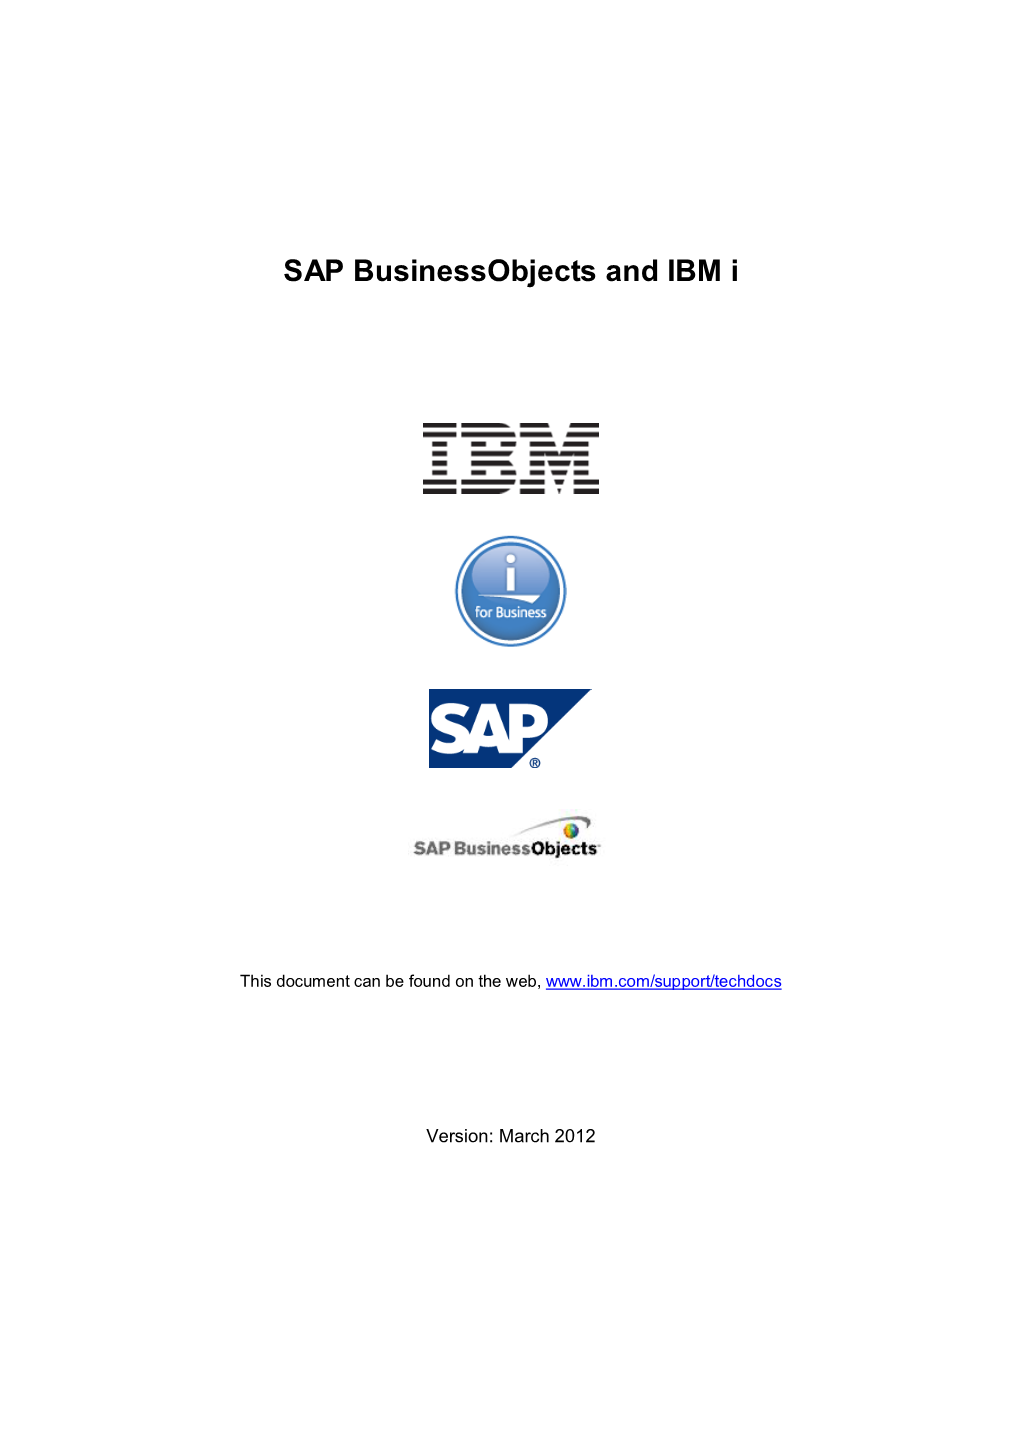 SAP Businessobjects and IBM I